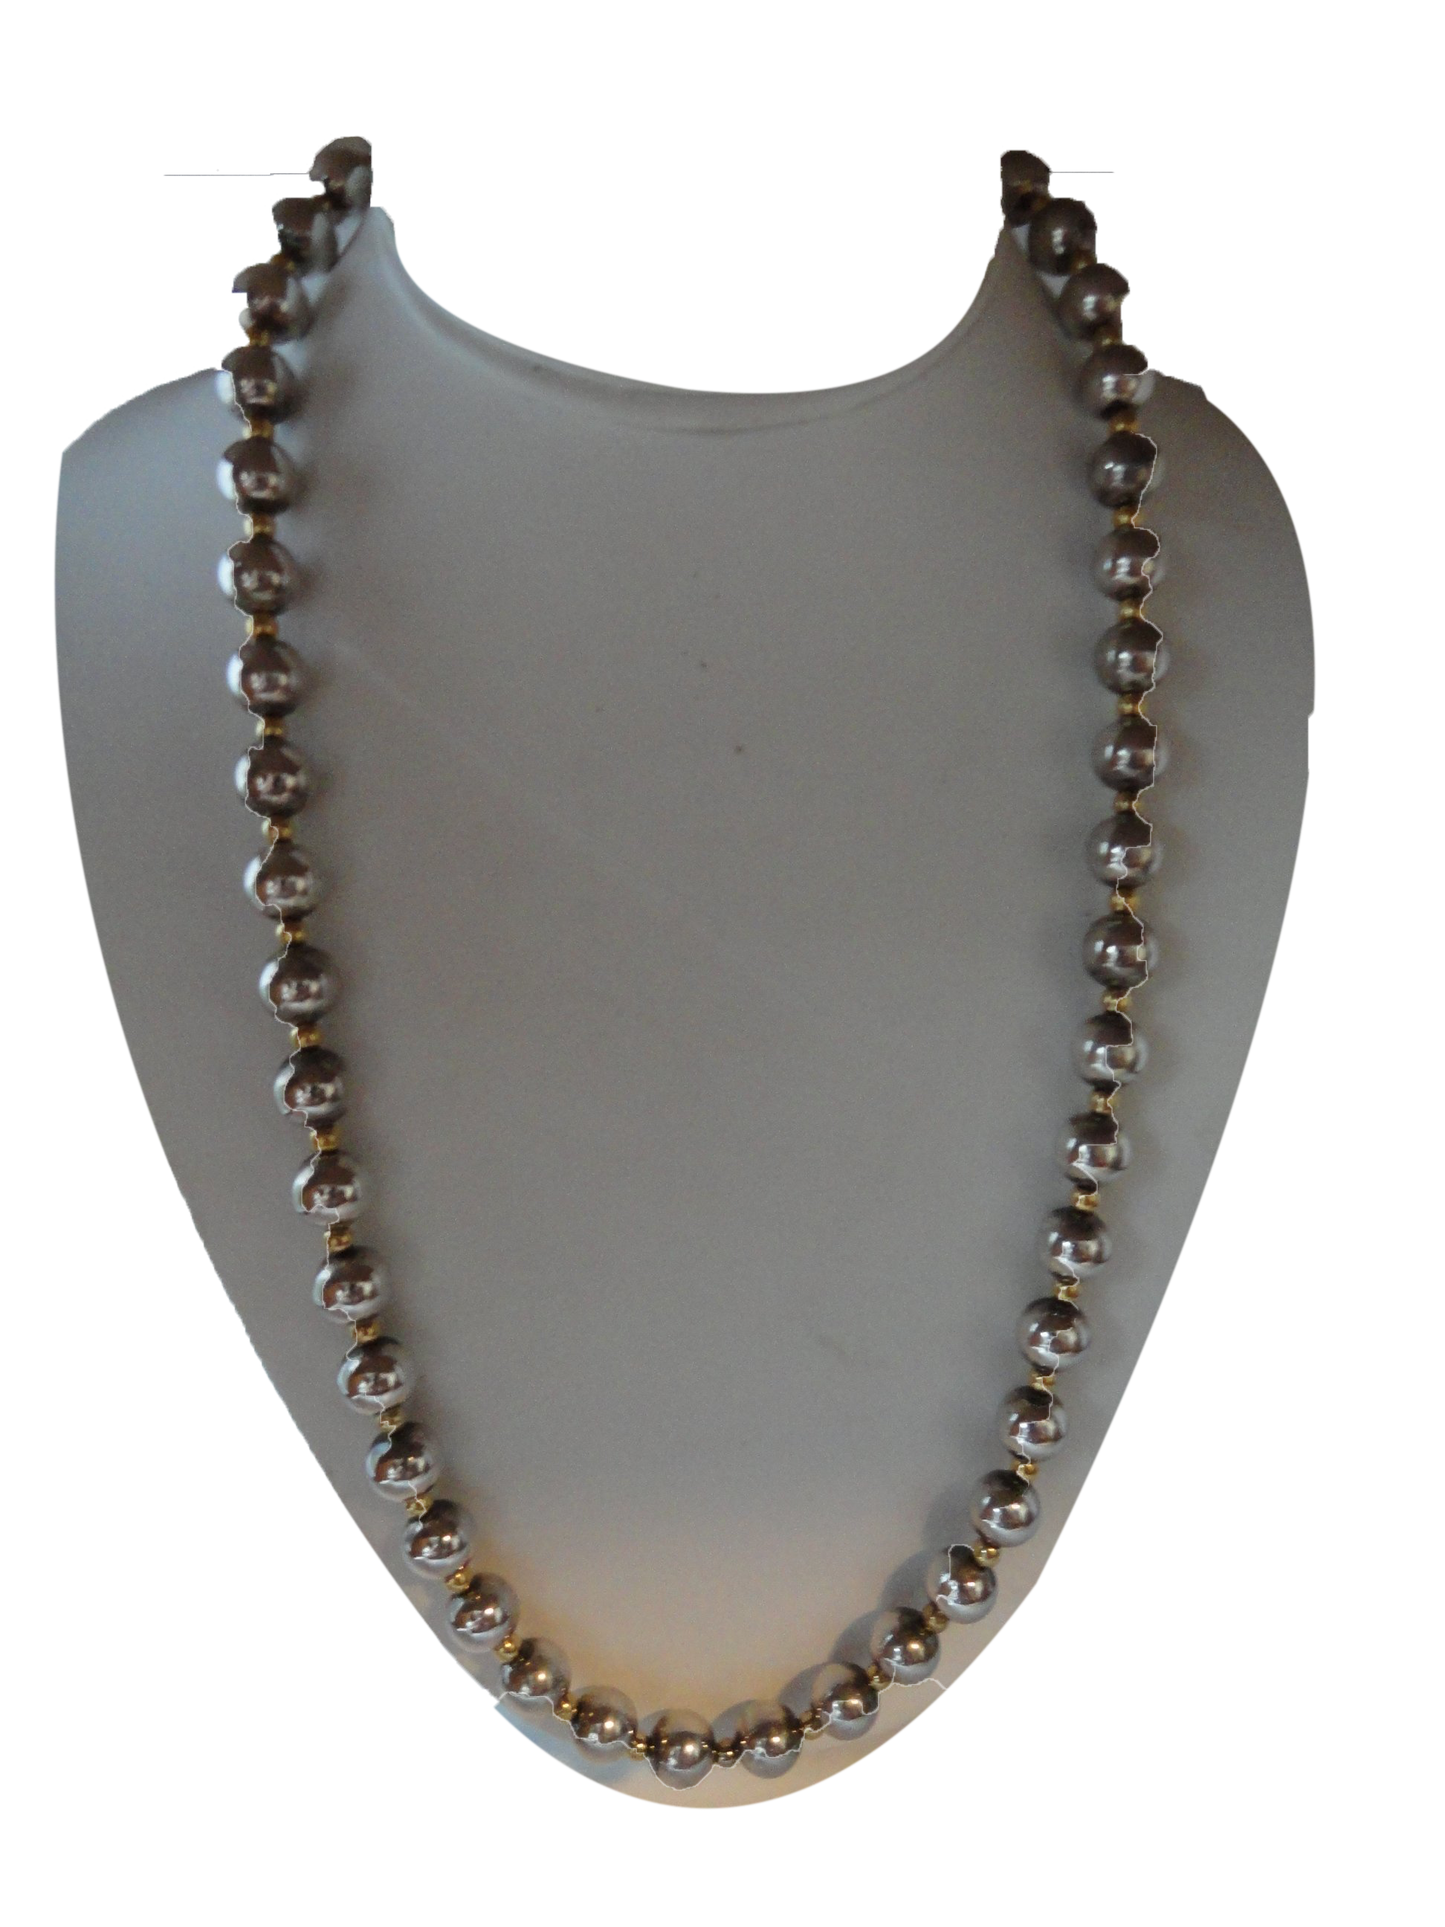 Necklace Silver & Gold Beads SKU 004007-2